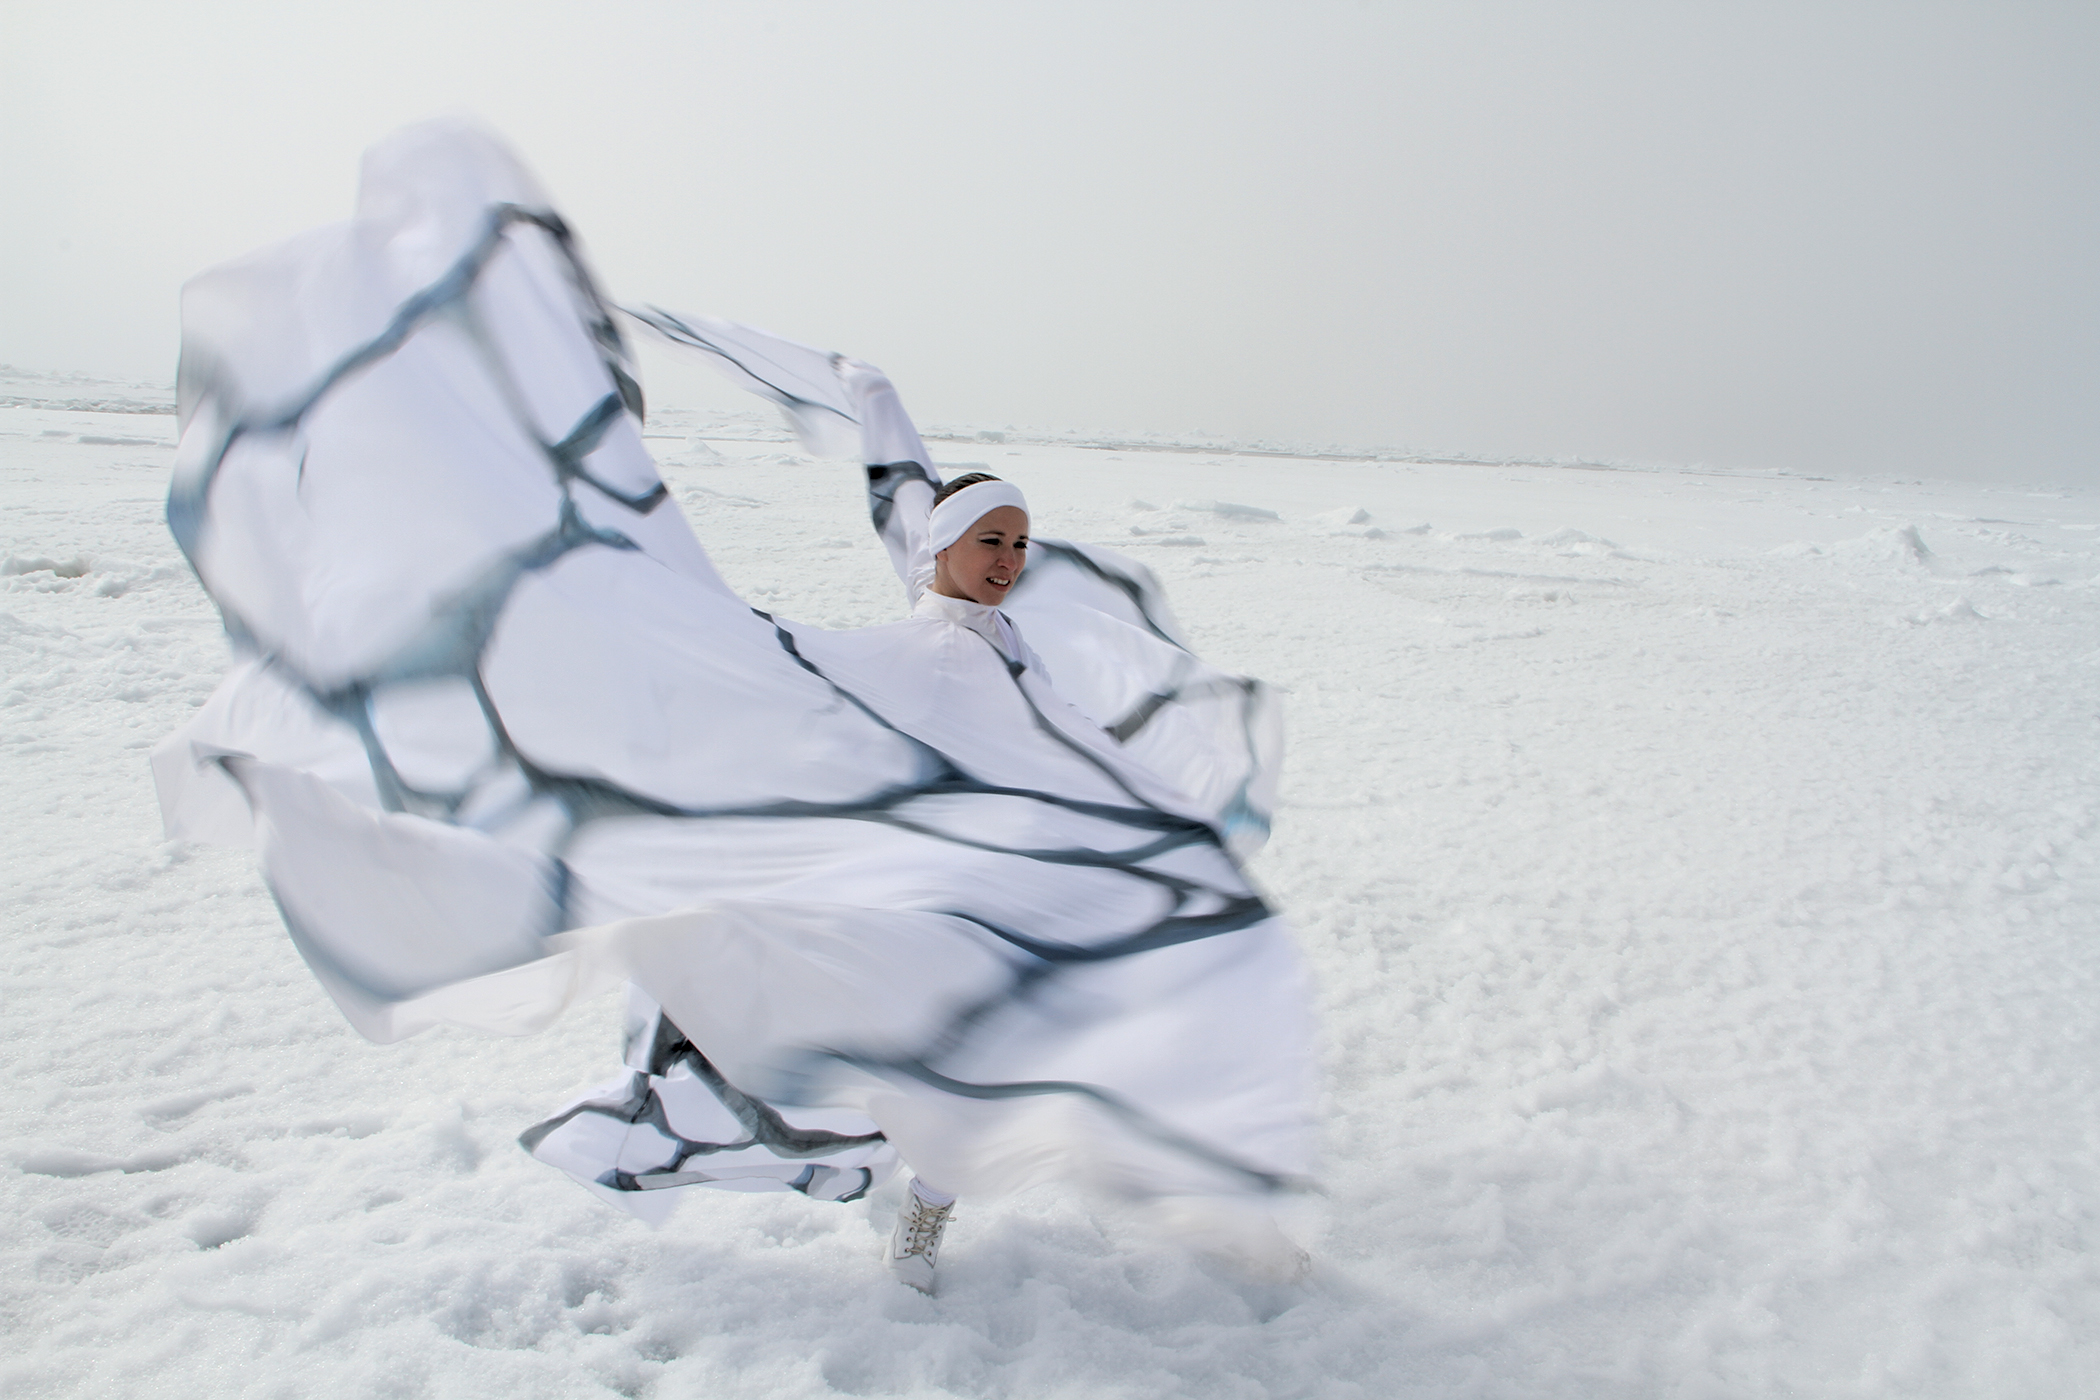 Choreographer Jody Sperling ’92 traveled to the Arctic Ocean to create her pieces on climate change. Her “Ice Flow” video captures the experience. Upcoming dance pieces and collaborations will explore the environmental questions further. See timelapsedance.com for more information and listings. Photo: Pierre Coupel